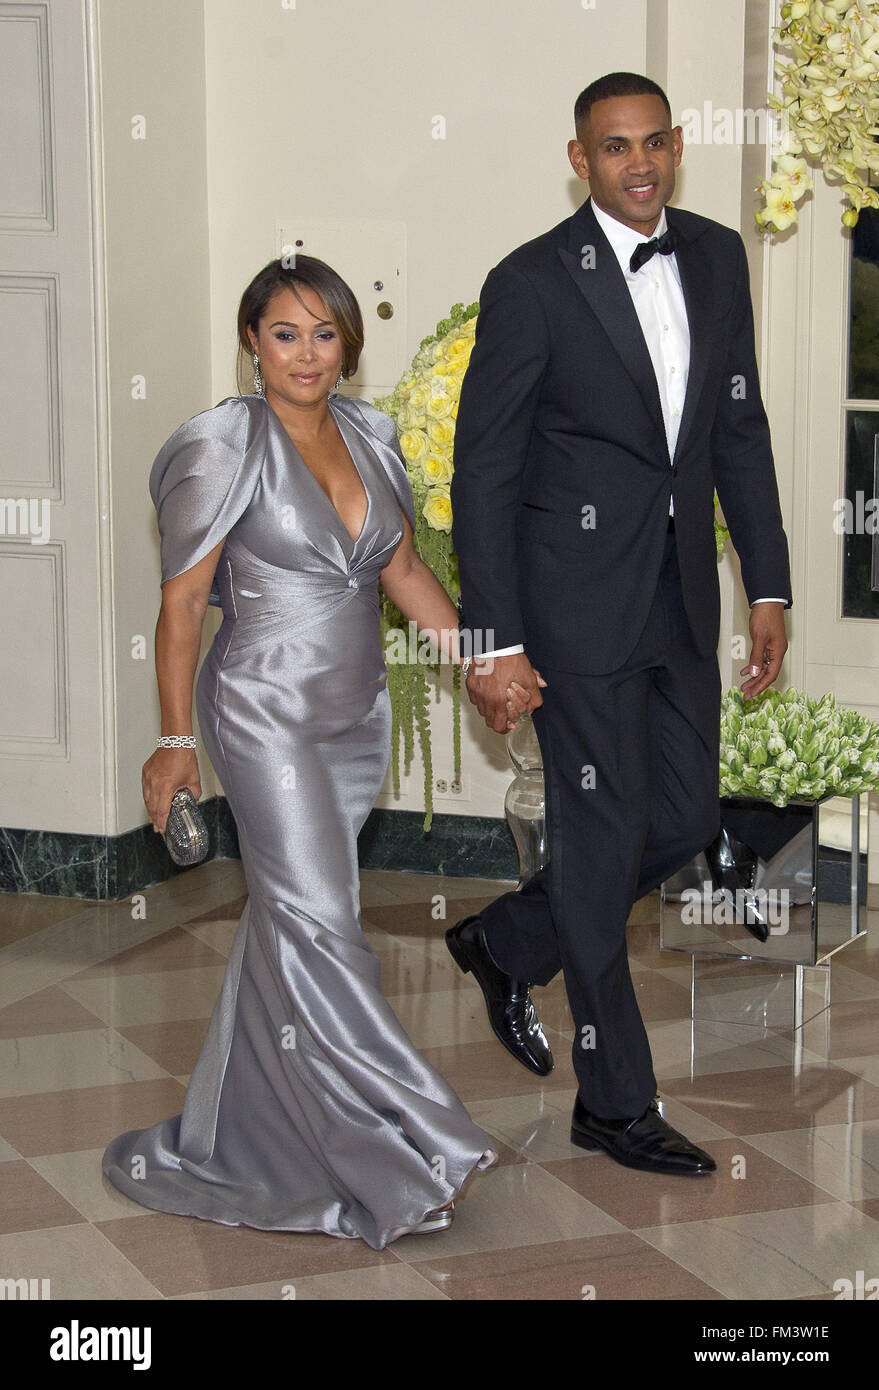 Washington, District of Columbia, USA. 10th Mar, 2016. Grant Hill, Former Basketball Player, Member of The President's Council on Fitness, Sports & Nutrition and Tamia Hill arrives for the State Dinner in honor of Prime Minister Trudeau and Mrs. Sophie Grégoire Trudeau of Canada at the White House in Washington, DC on Thursday, March 10, 2016.Credit: Ron Sachs/Pool via CNP Credit:  Ron Sachs/CNP/ZUMA Wire/Alamy Live News Stock Photo